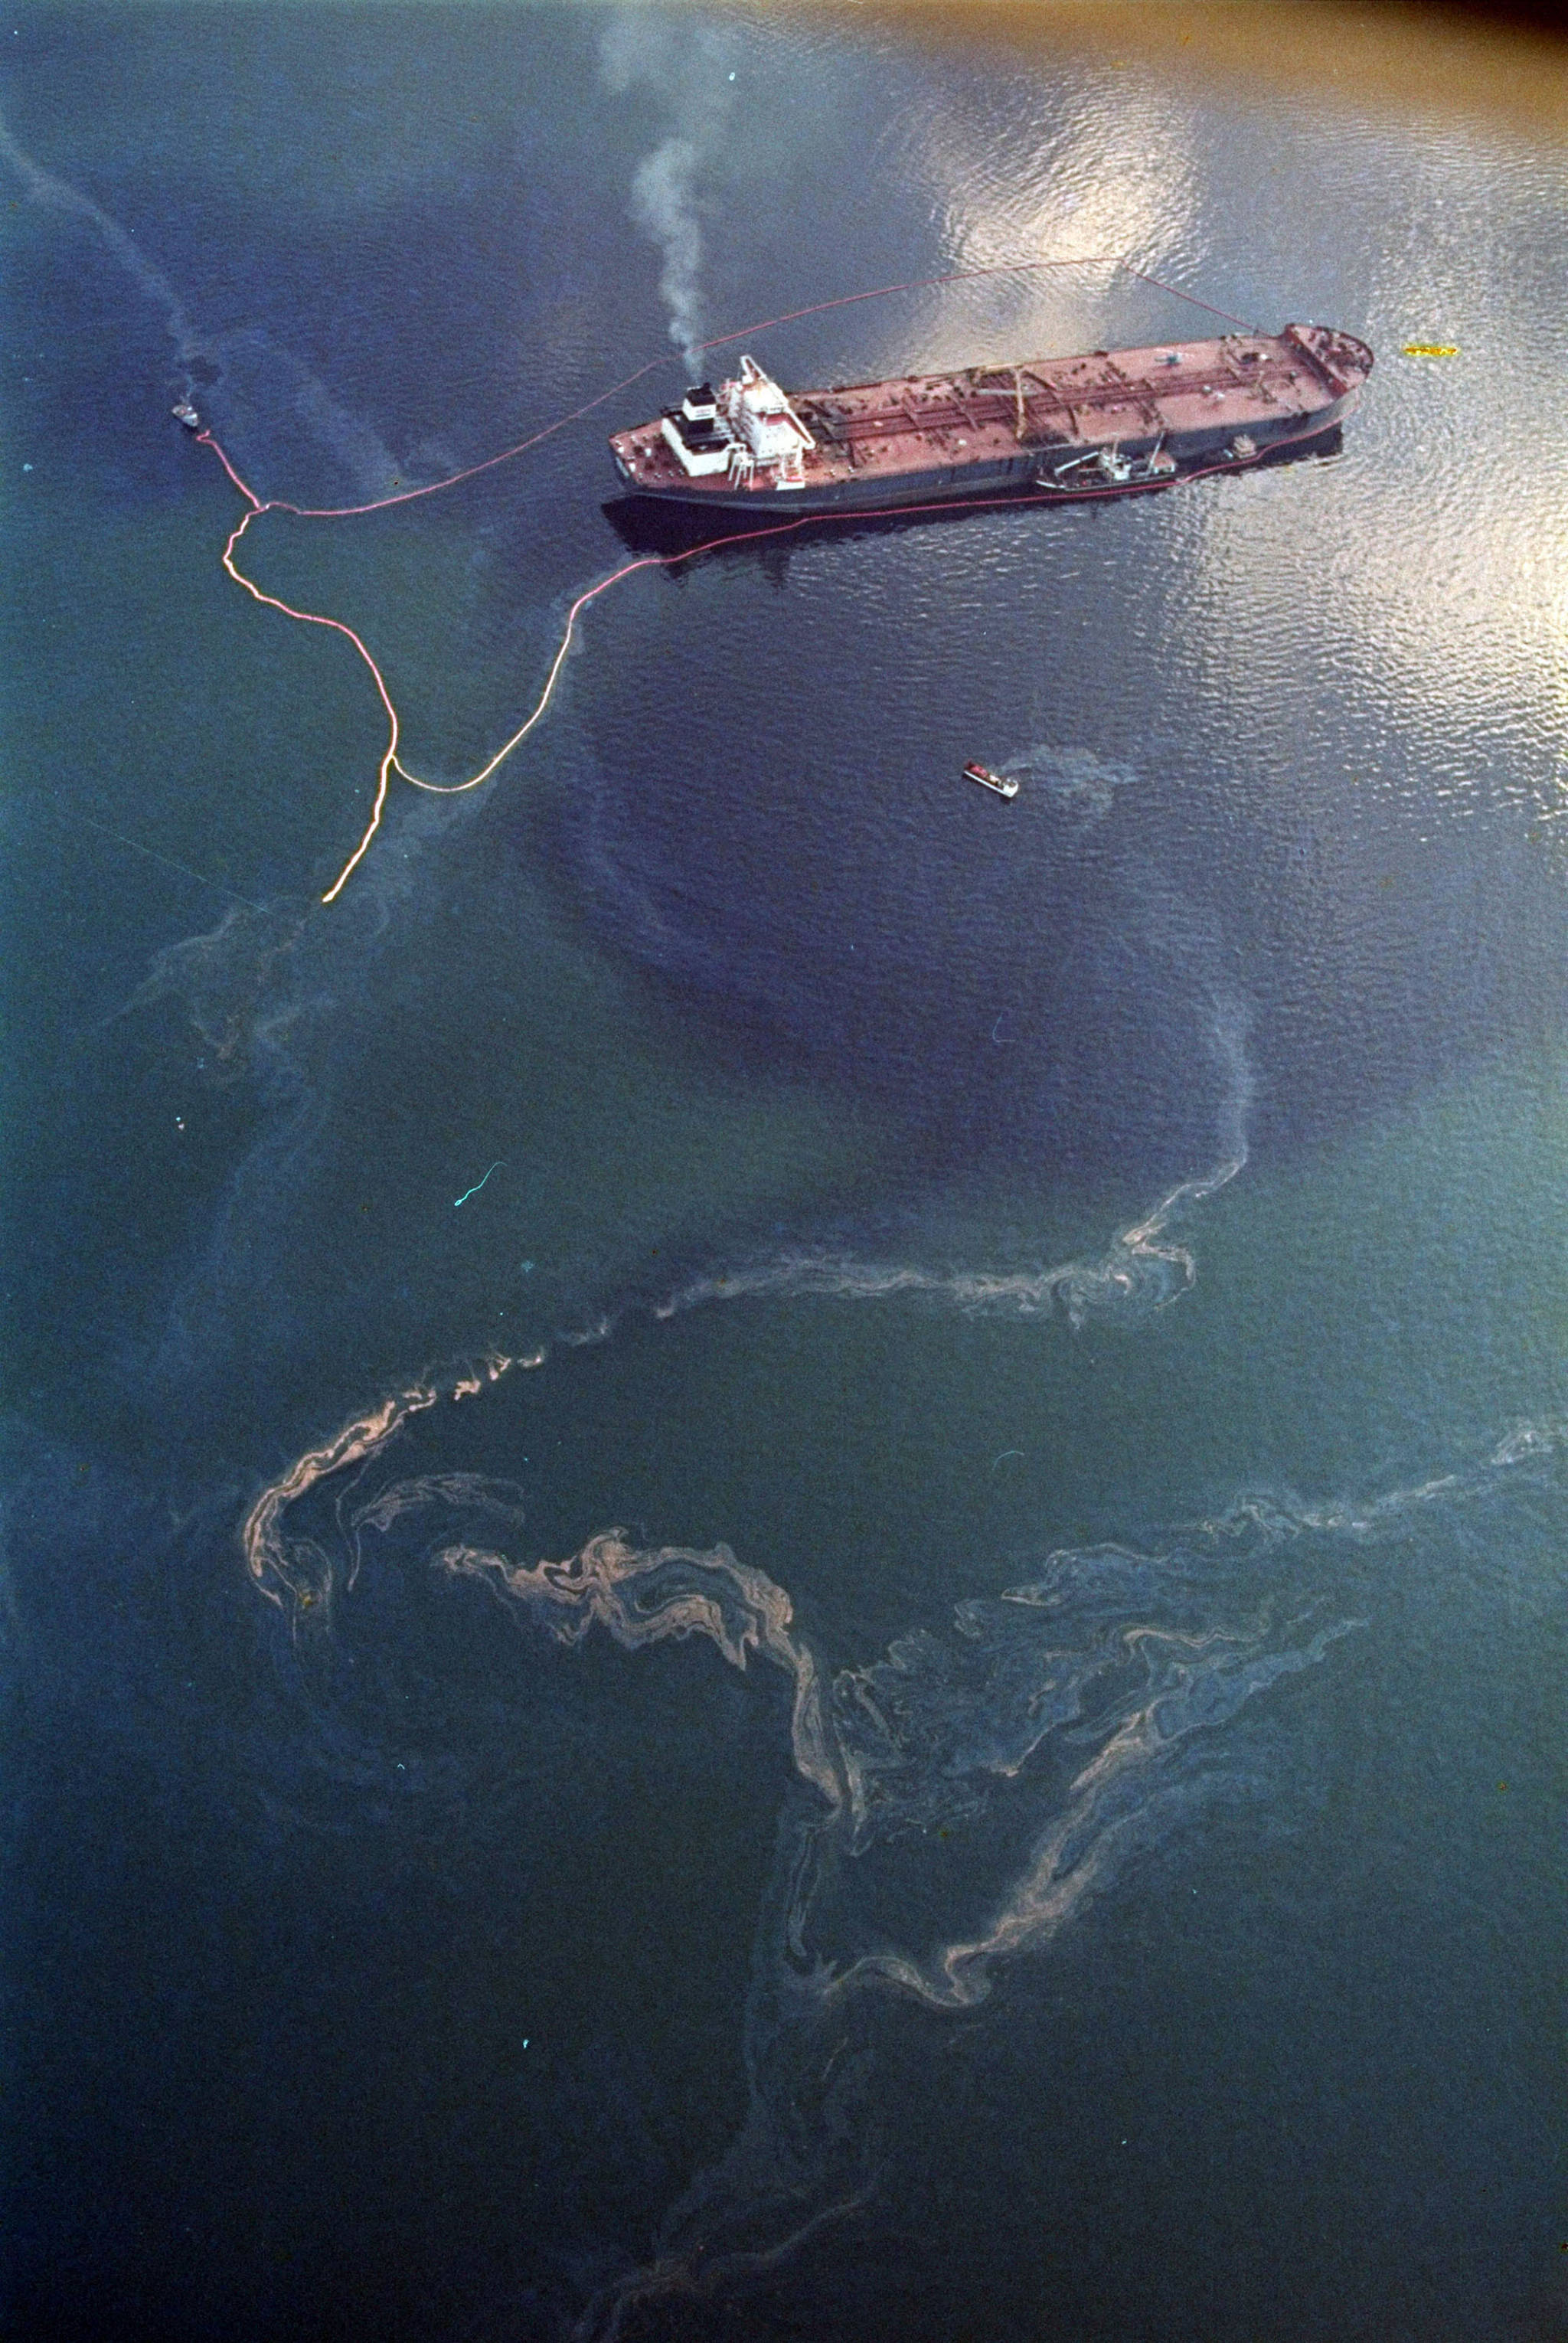 In this April 9, 1989 photo, crude oil from the tanker Exxon Valdez, top, swirls on the surface of Alaska’s Prince William Sound near Naked Island, days after the tanker ran aground, spilling millions of gallons of oil and causing widespread environmental damage. (John Gaps III | Associated Press File)